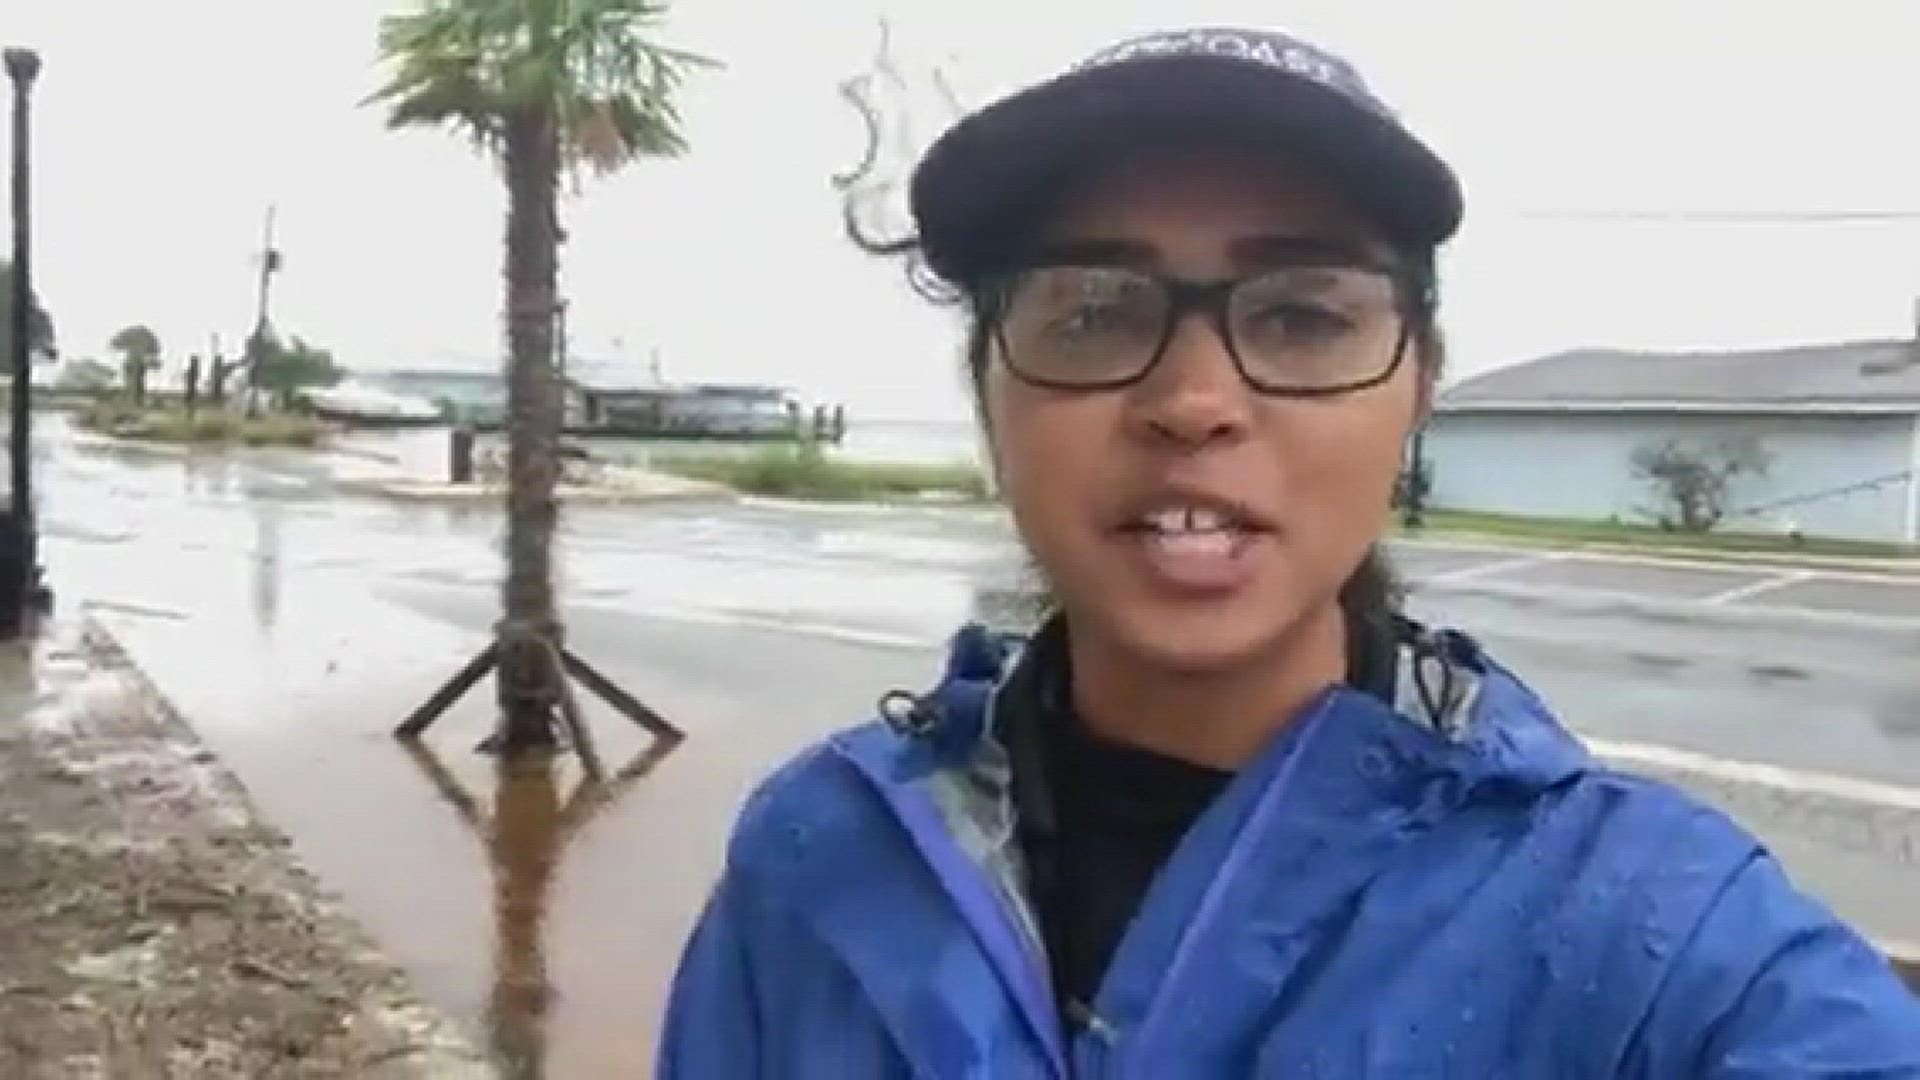 Atyia Collins reports on flooding in St. Mary after Tropical Storm Ian
Credit: Atyia Collins